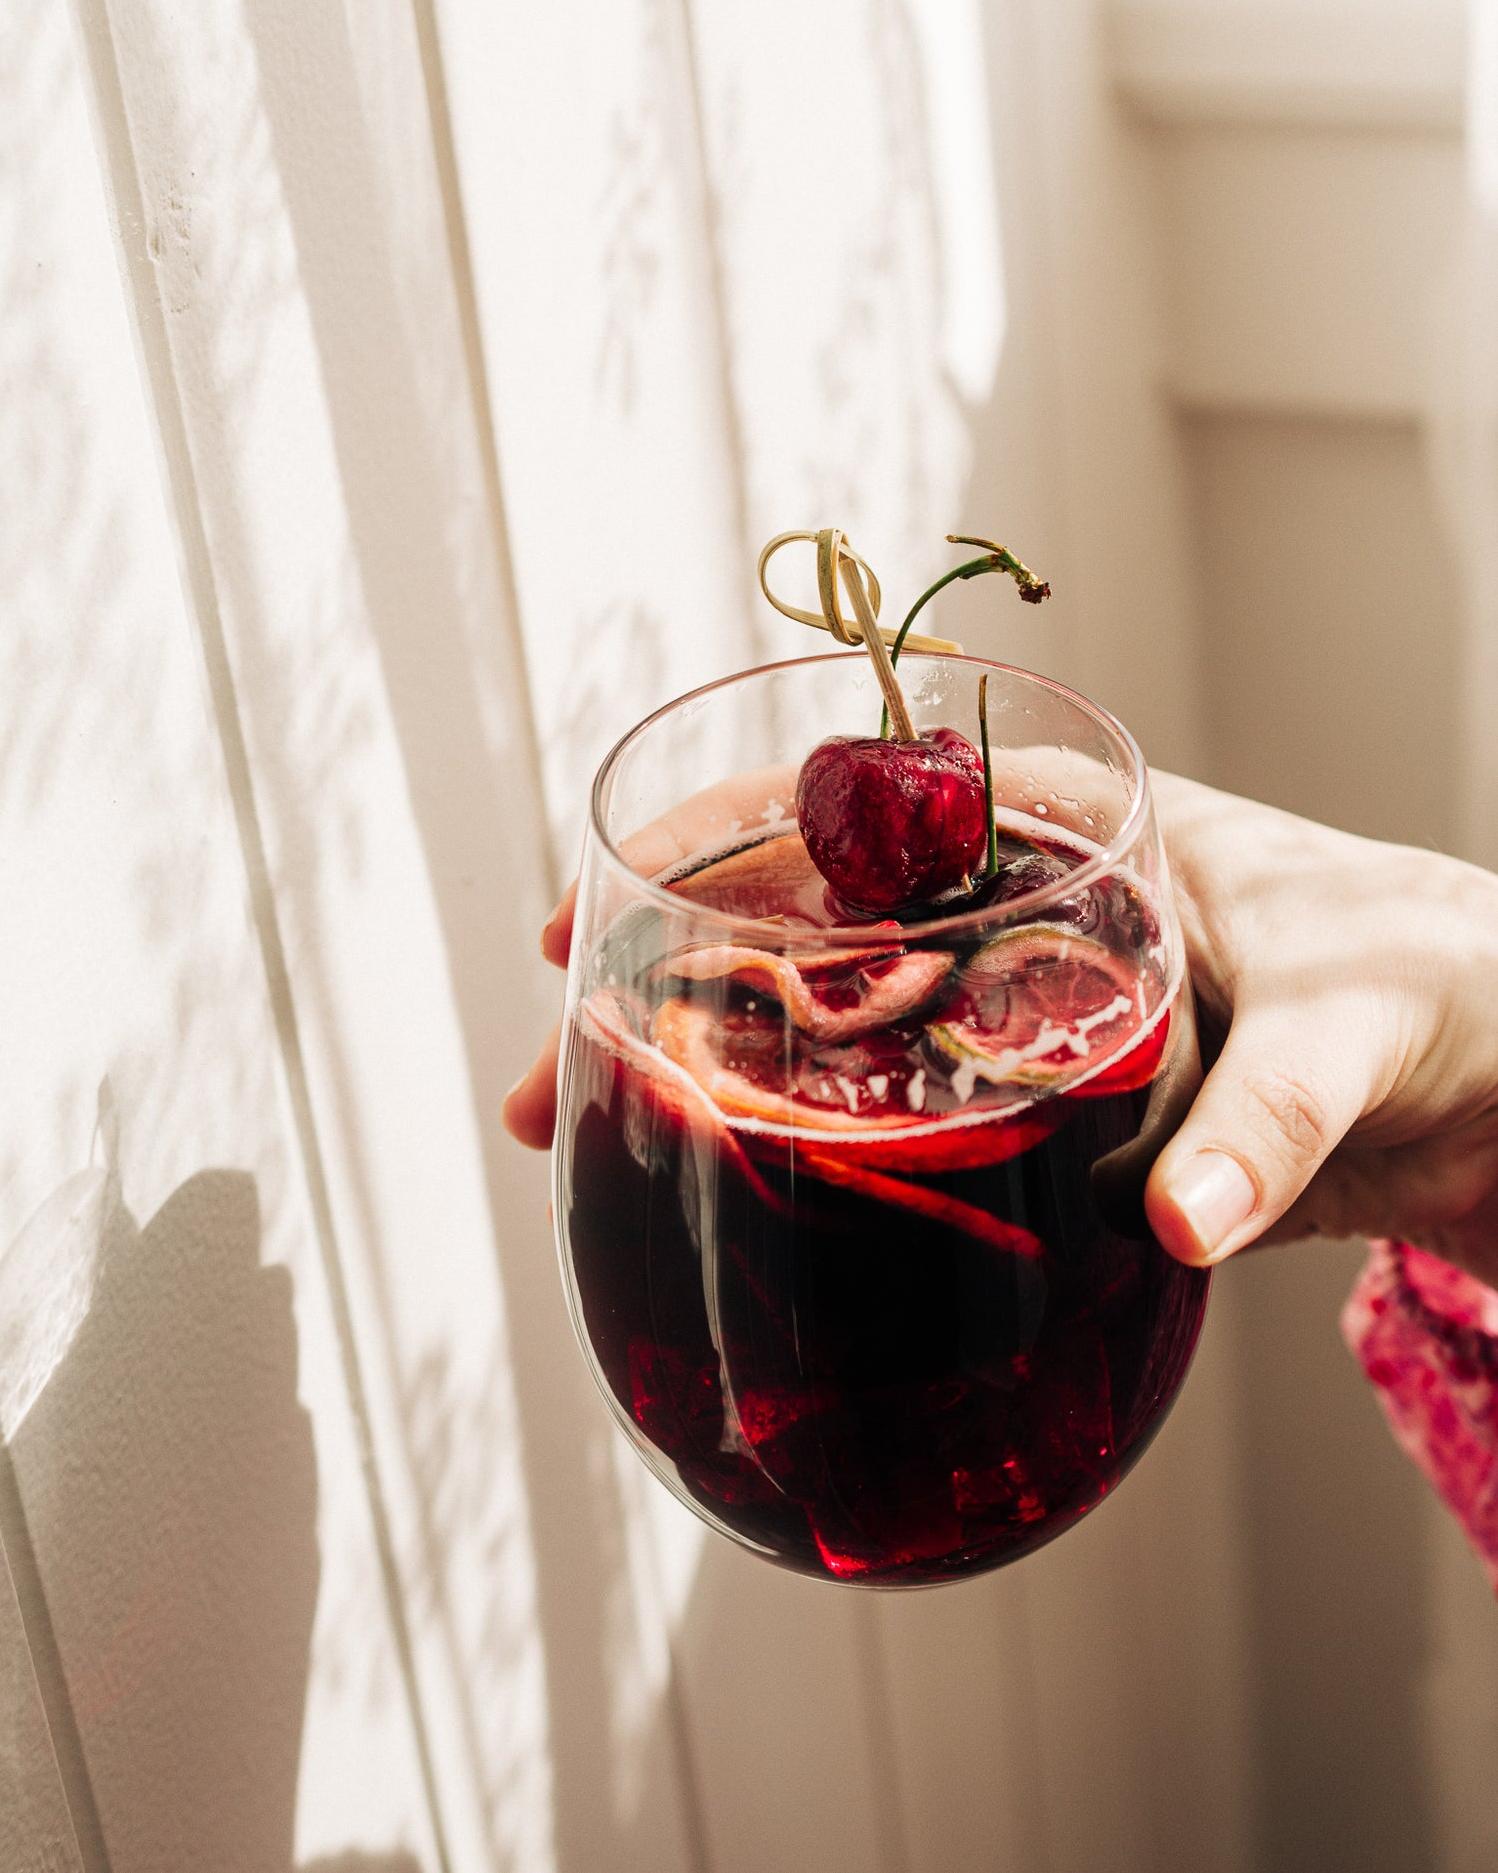  A colorful twist: the cherries add a pop of color to this vibrant drink.